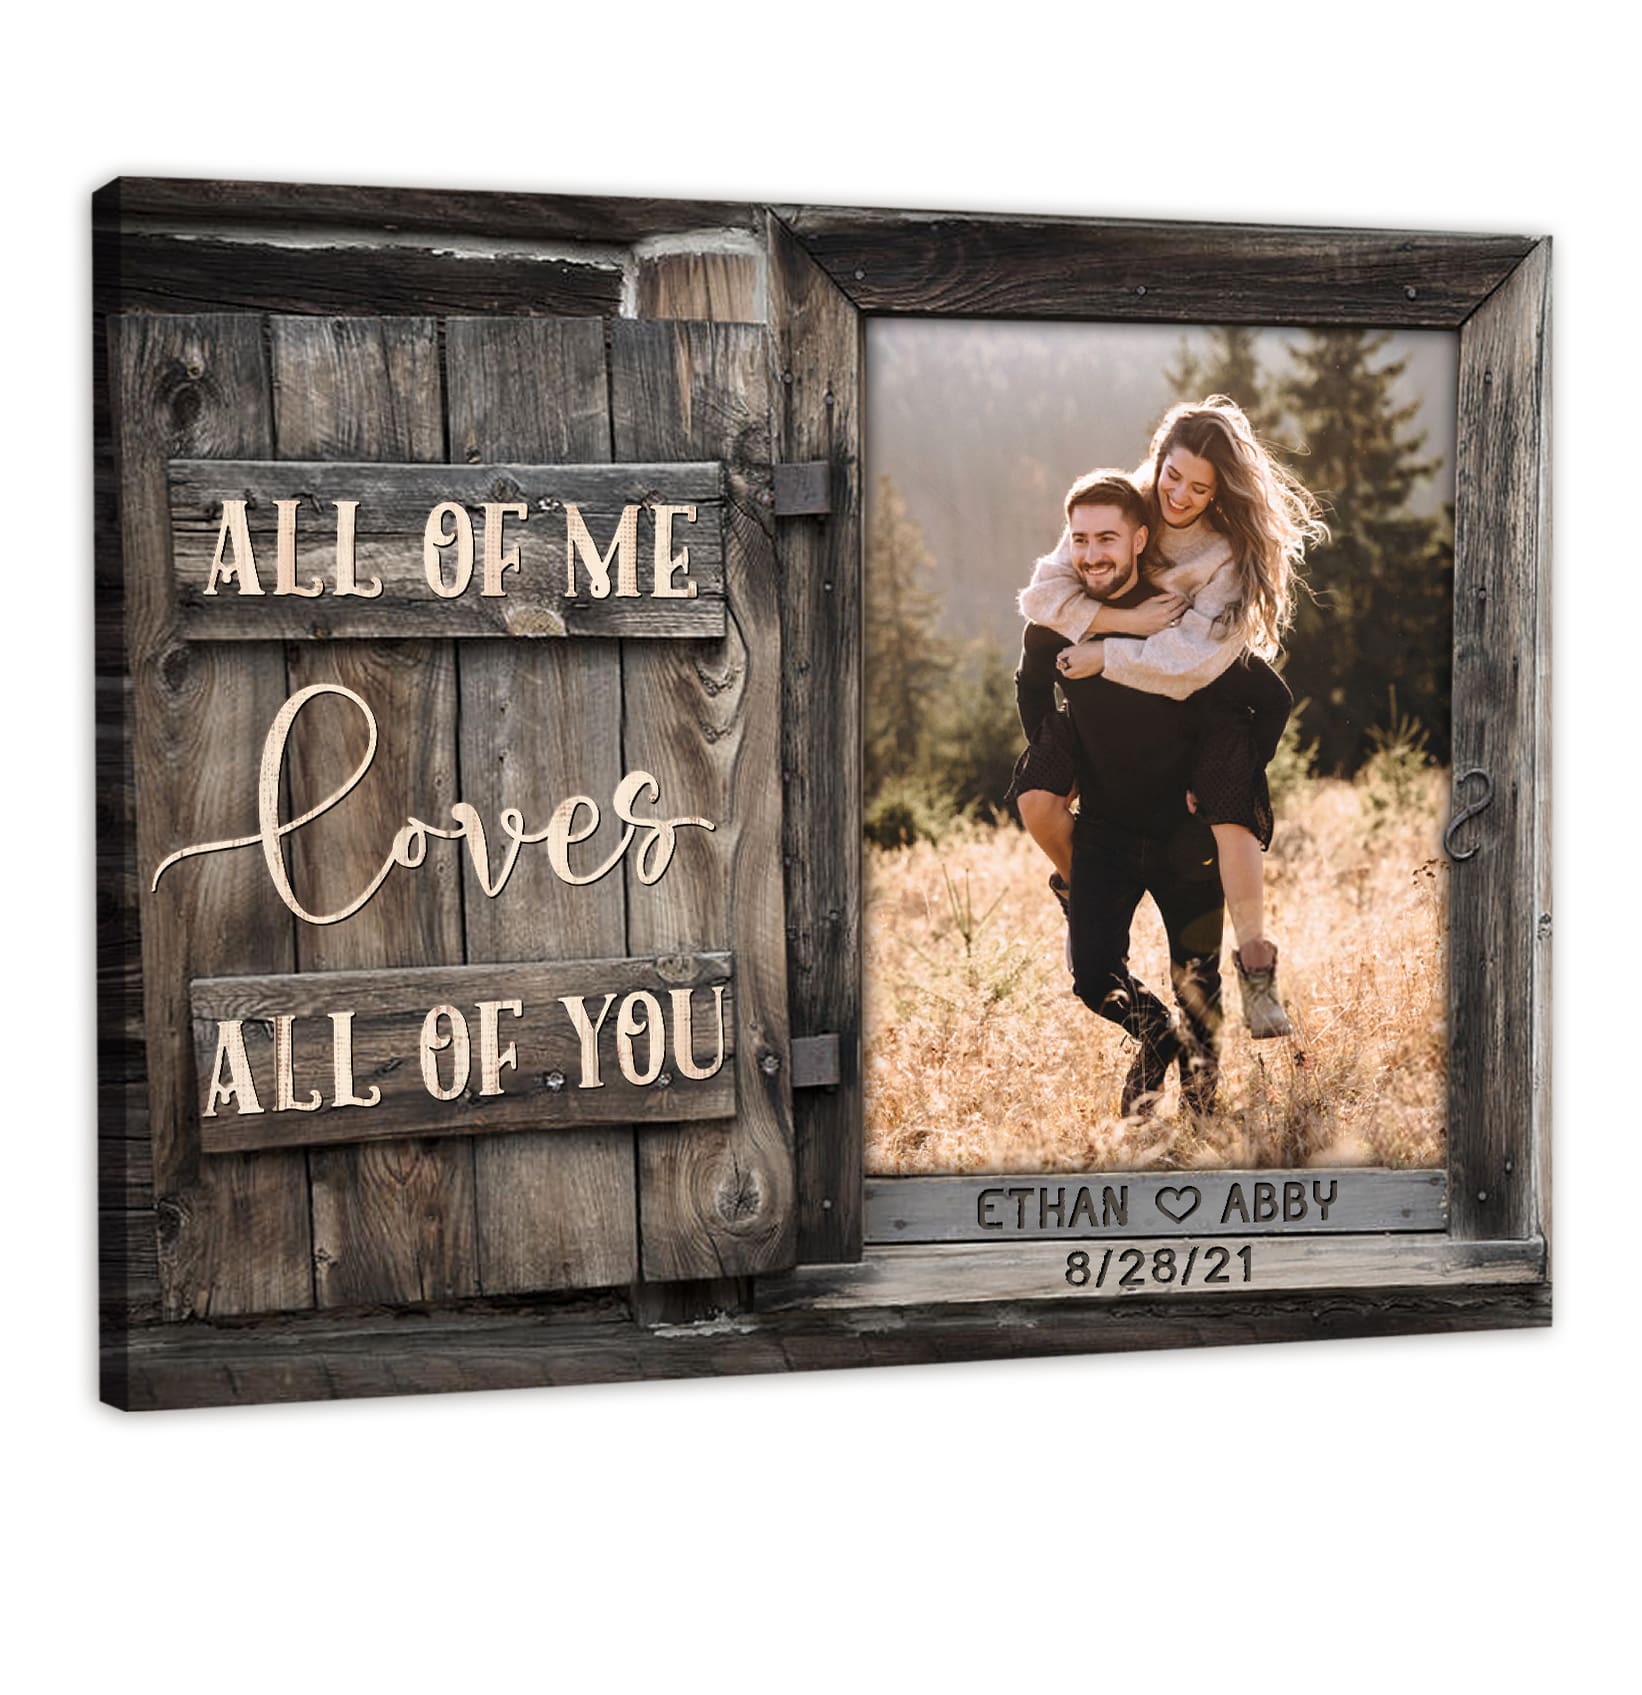 You&Me We Got This Wall Art Decor Custom Couple Name Personalized Canvas Rustic Window Beach Sign Gift for Couplel Custom Couple Canvas